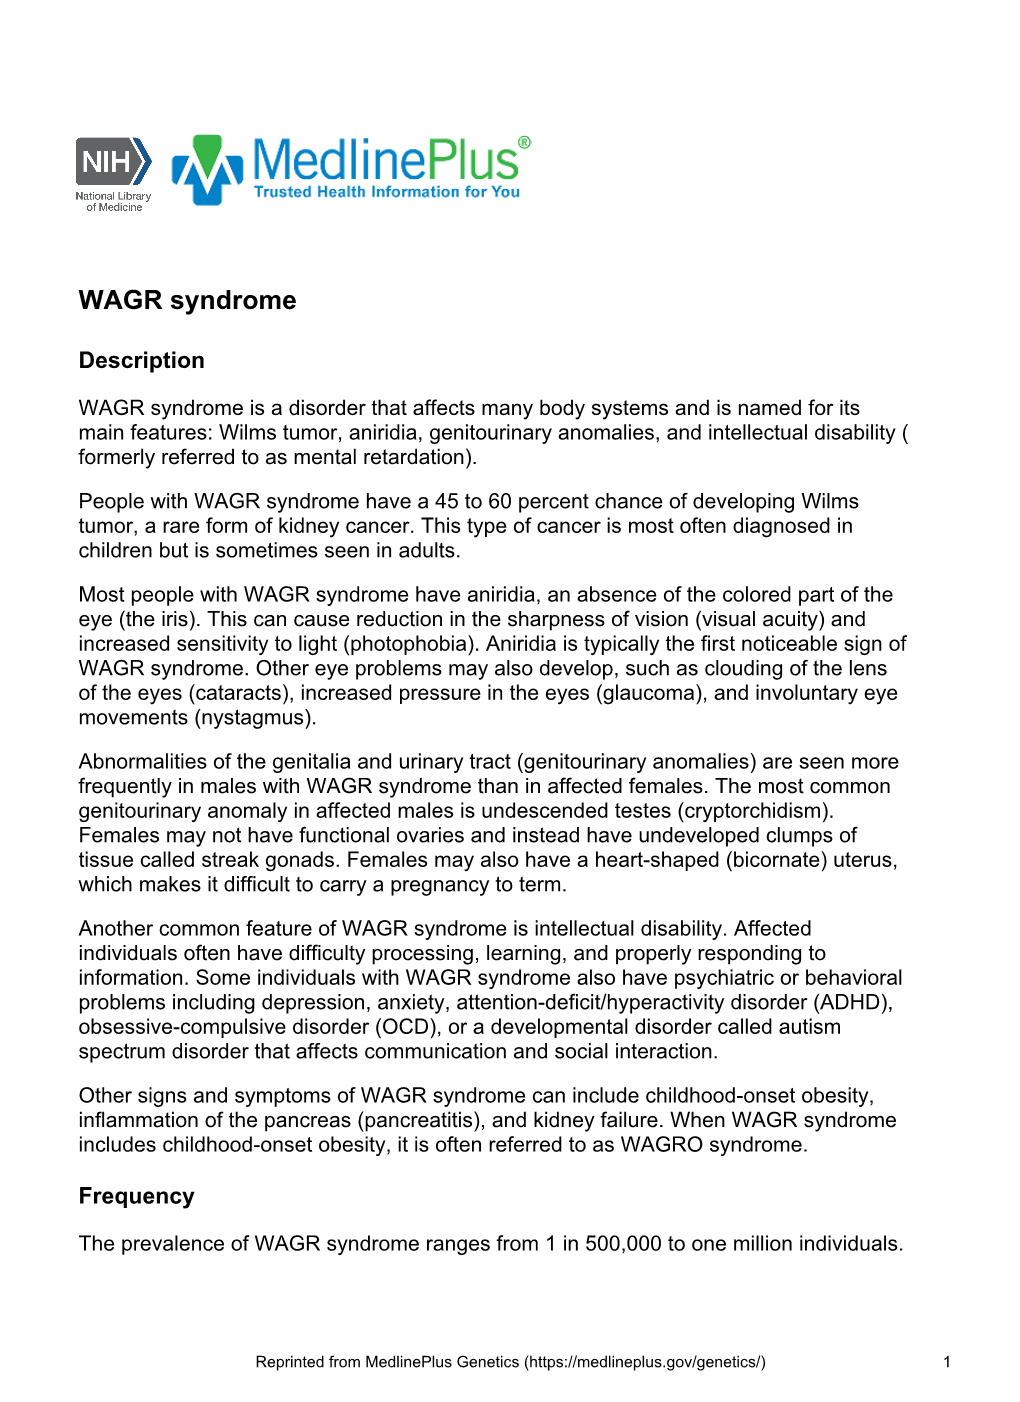 WAGR Syndrome